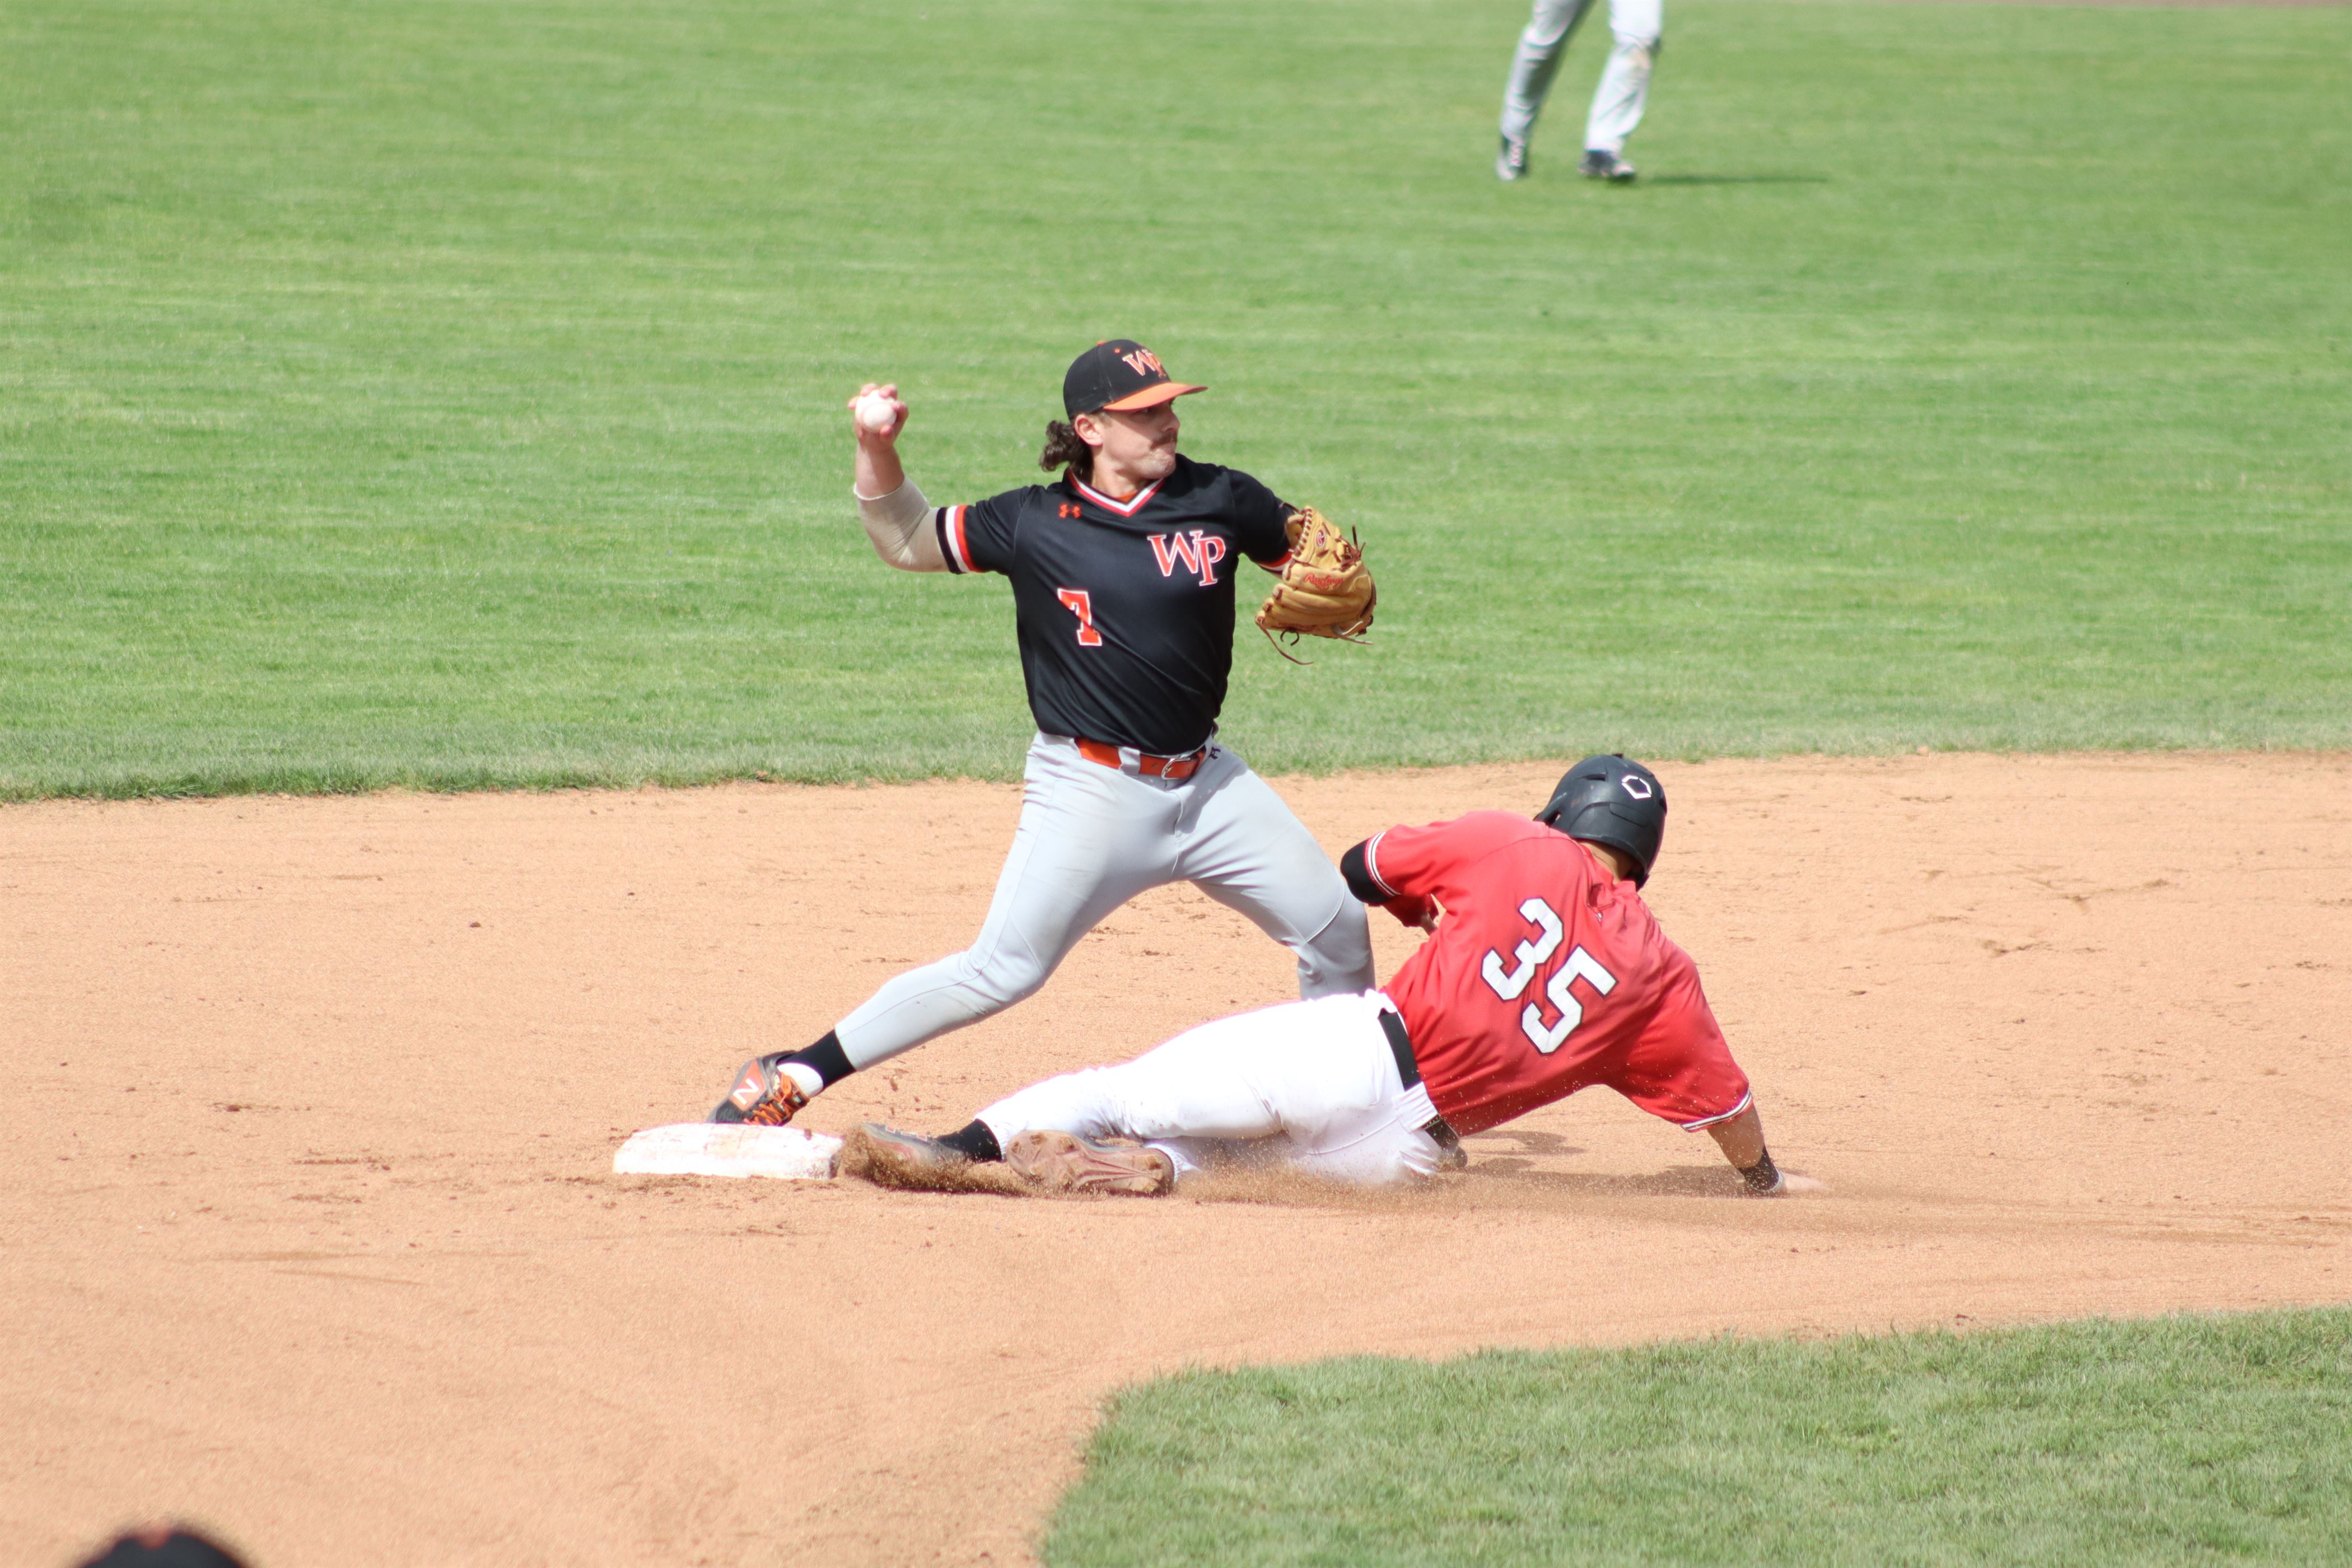 William Paterson University infielder turning the double play. Photo courtesy of Trevor Giesberg